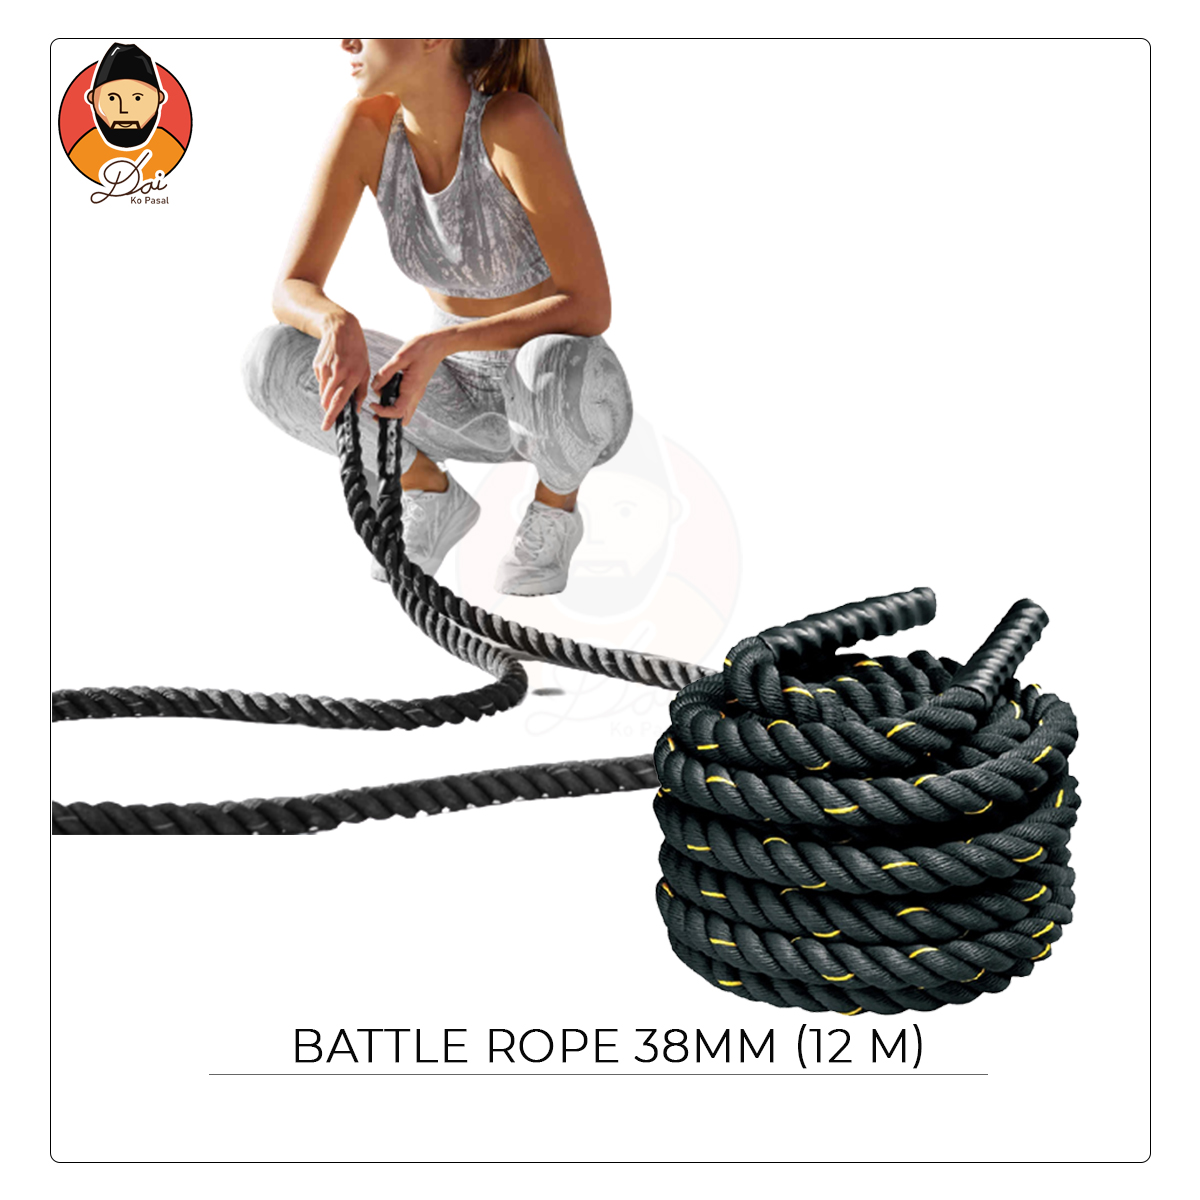 Battle Rope Exercise & Fitness Training Equipment Rope 38 mm Thick, length 12 Meter